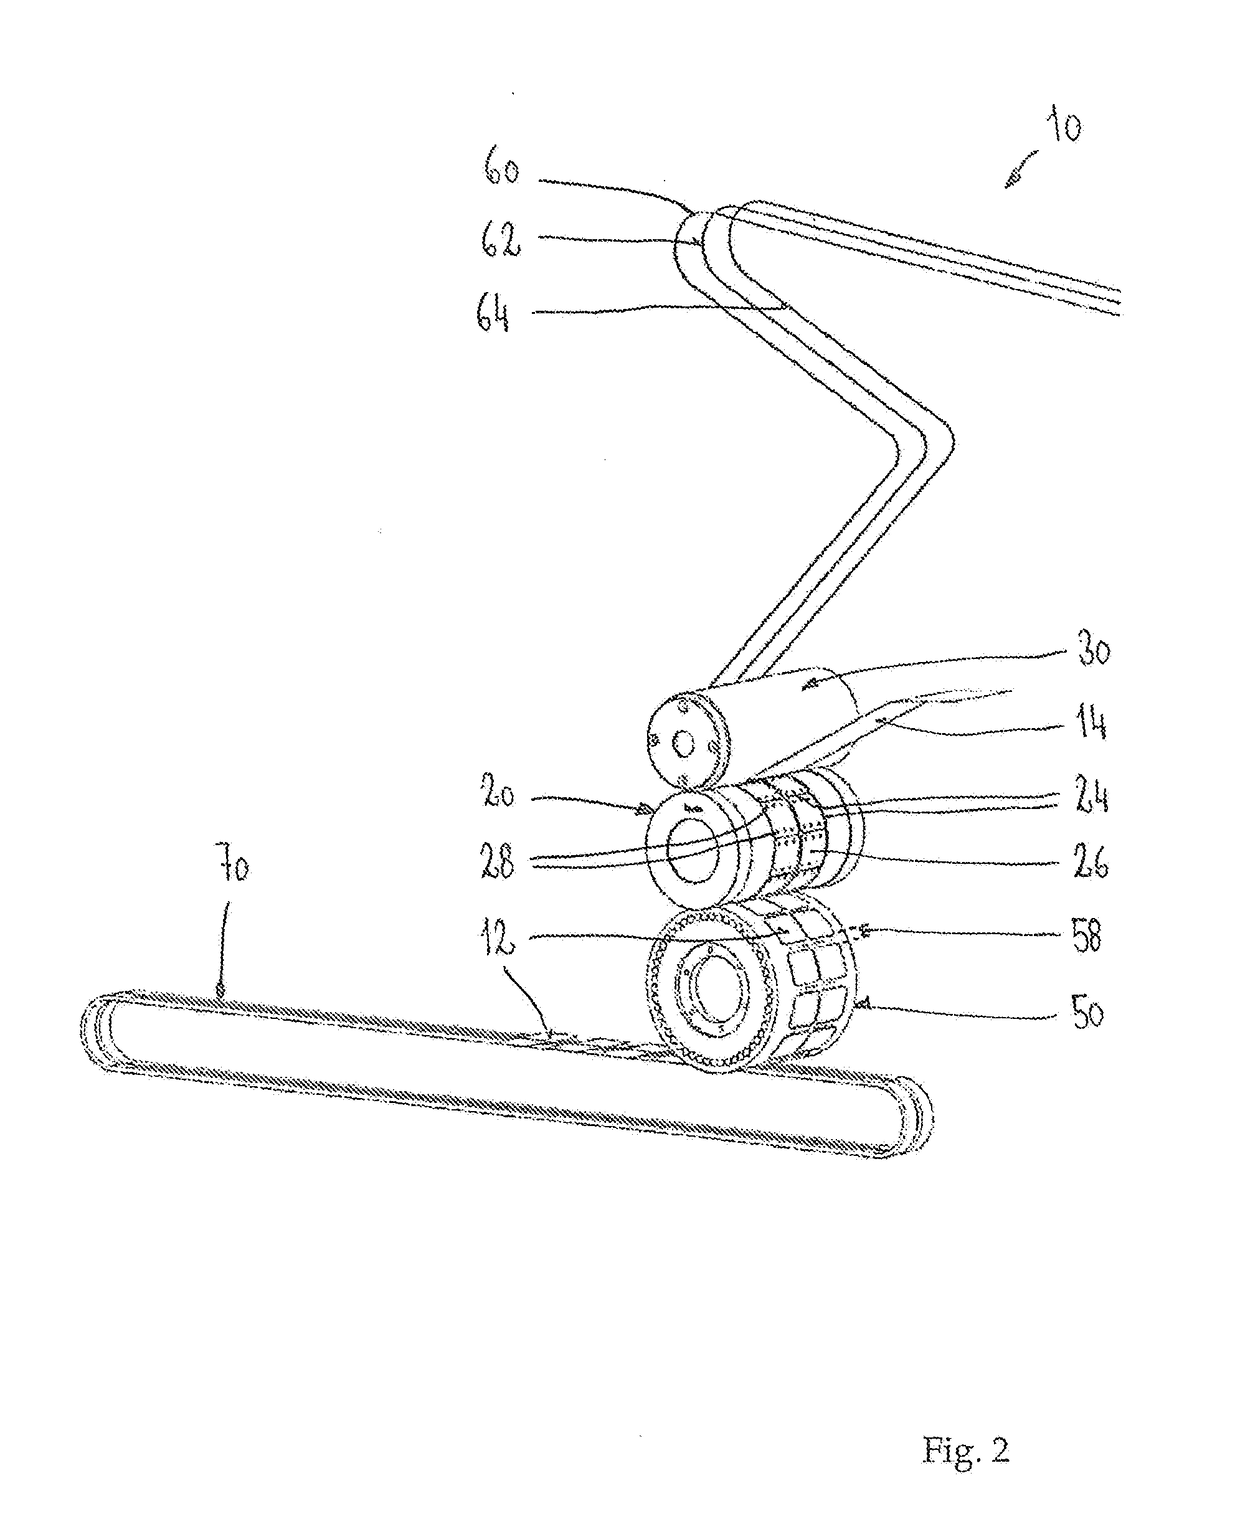 Device for releasing sections from a material web